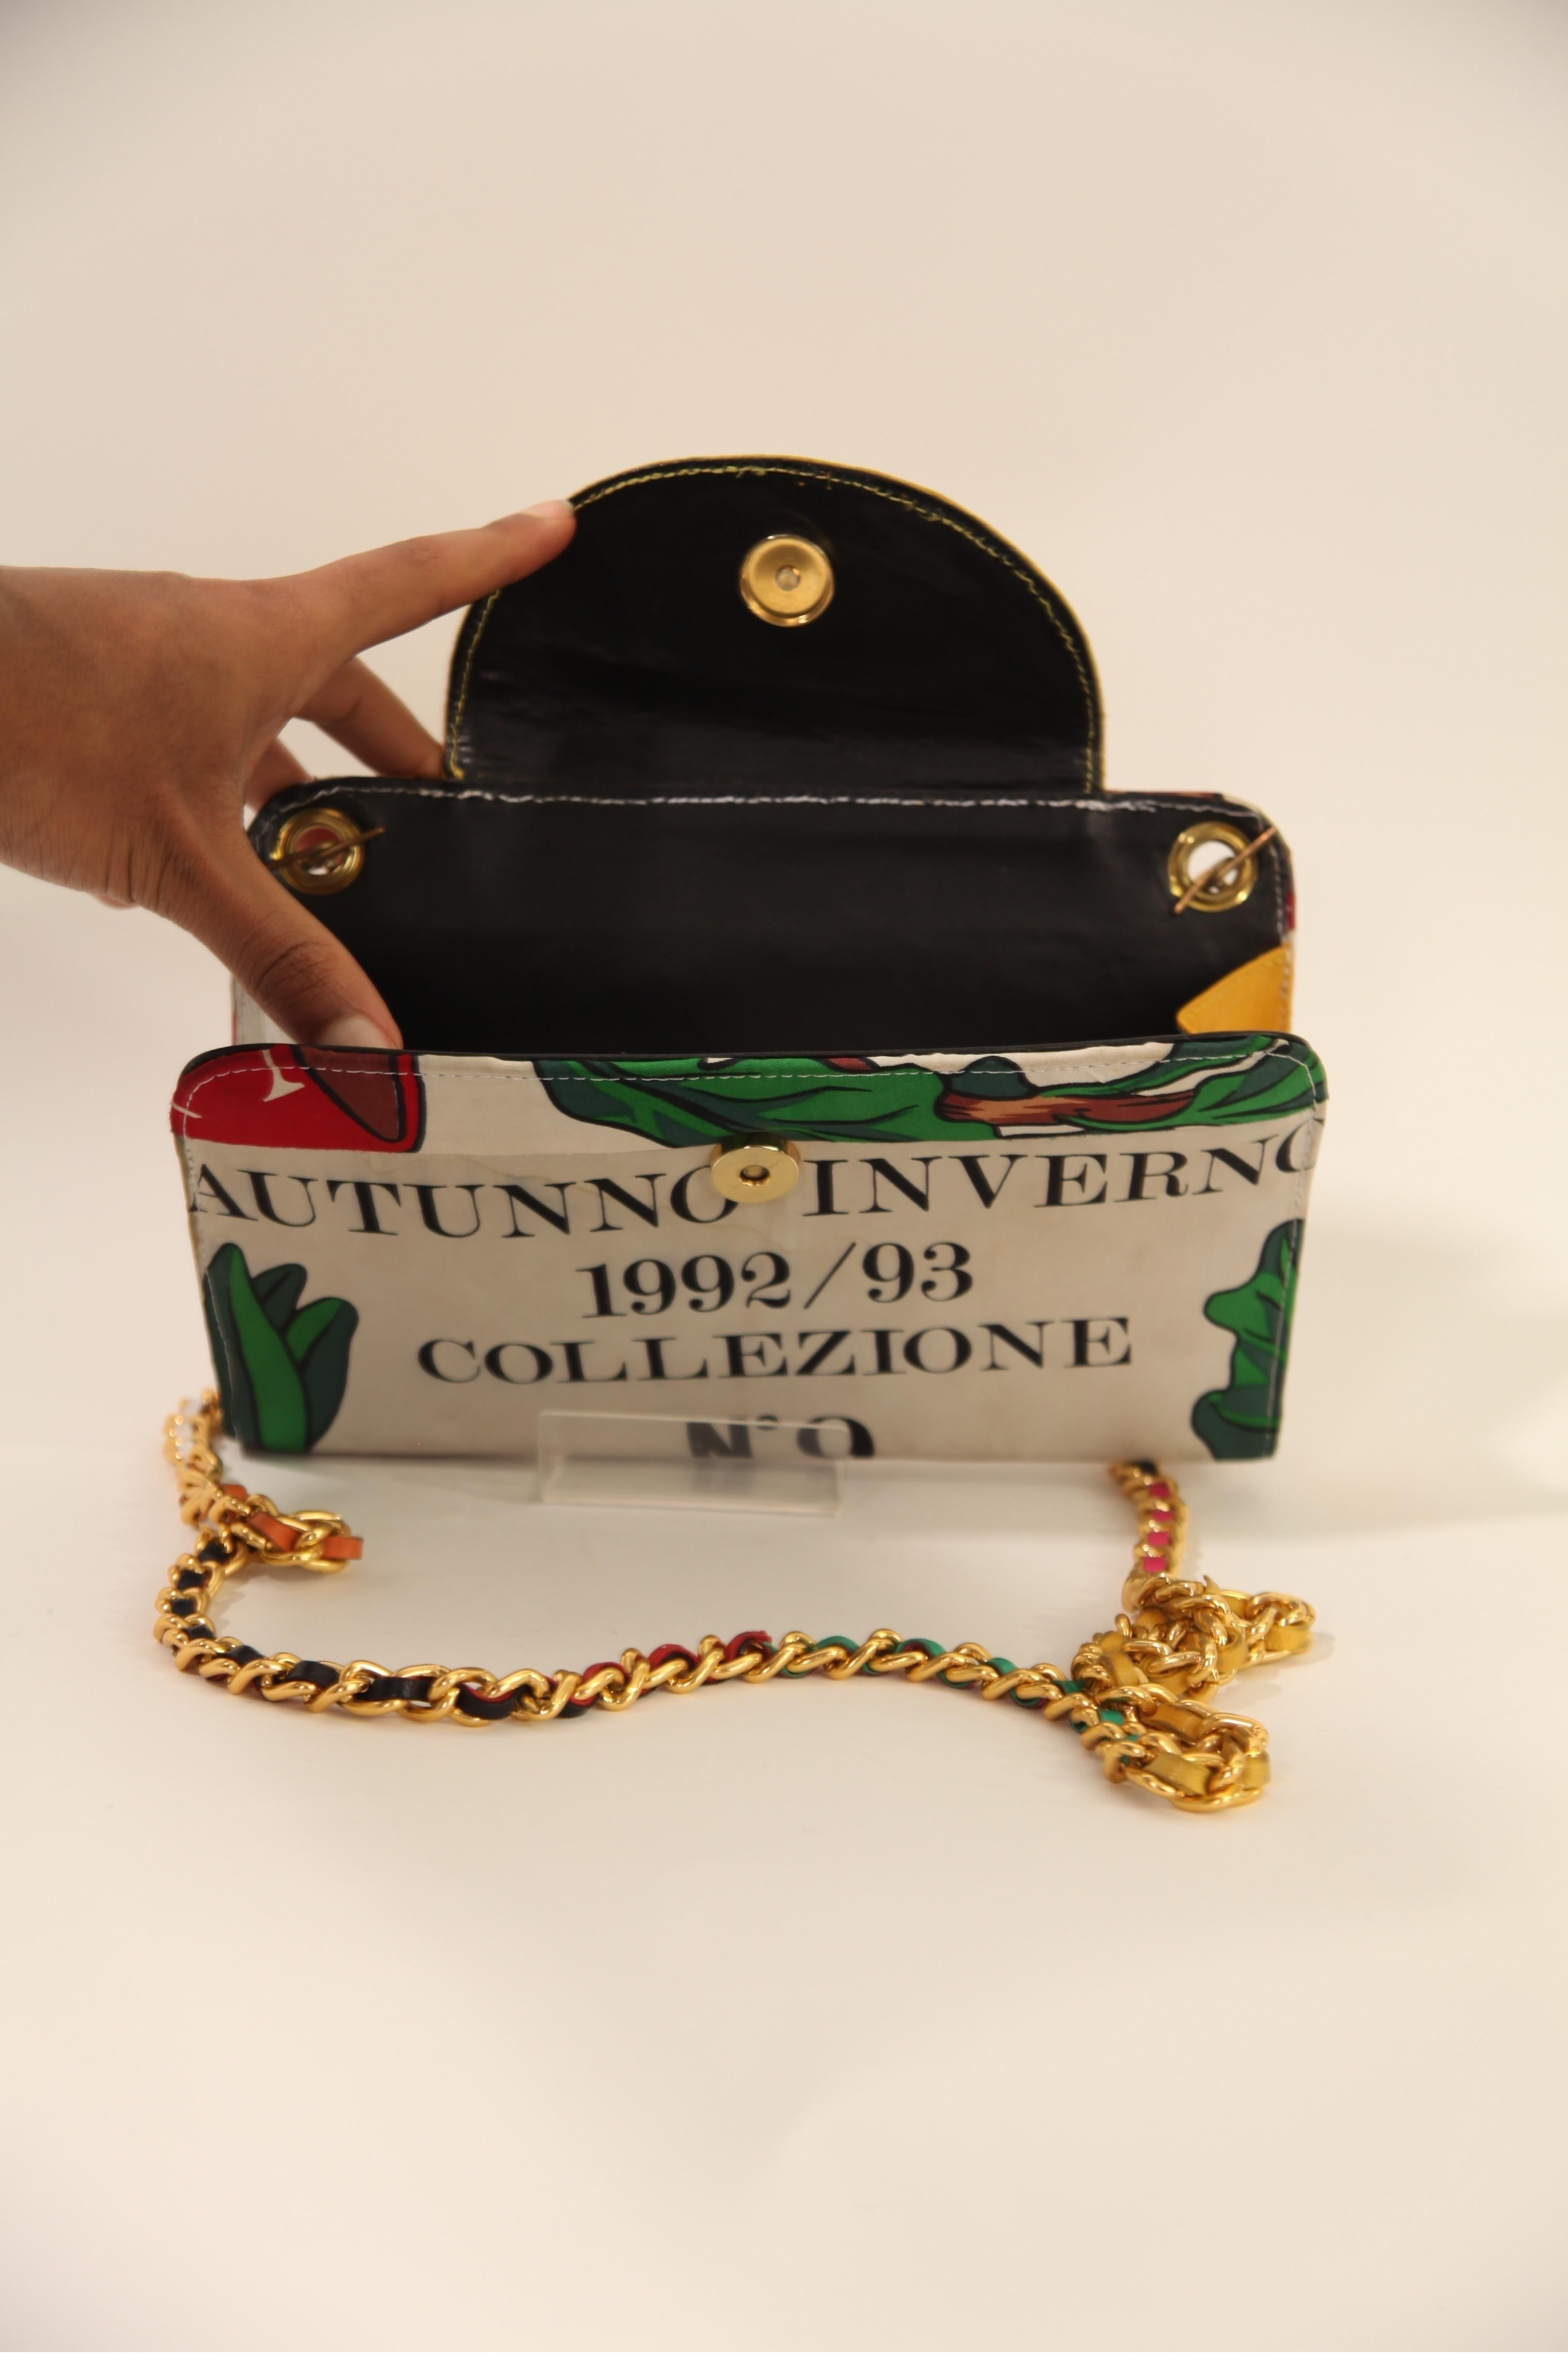 Moschino Cheap and Chic multicolour leather and textiles  clutch bag. C1992 For Sale 1